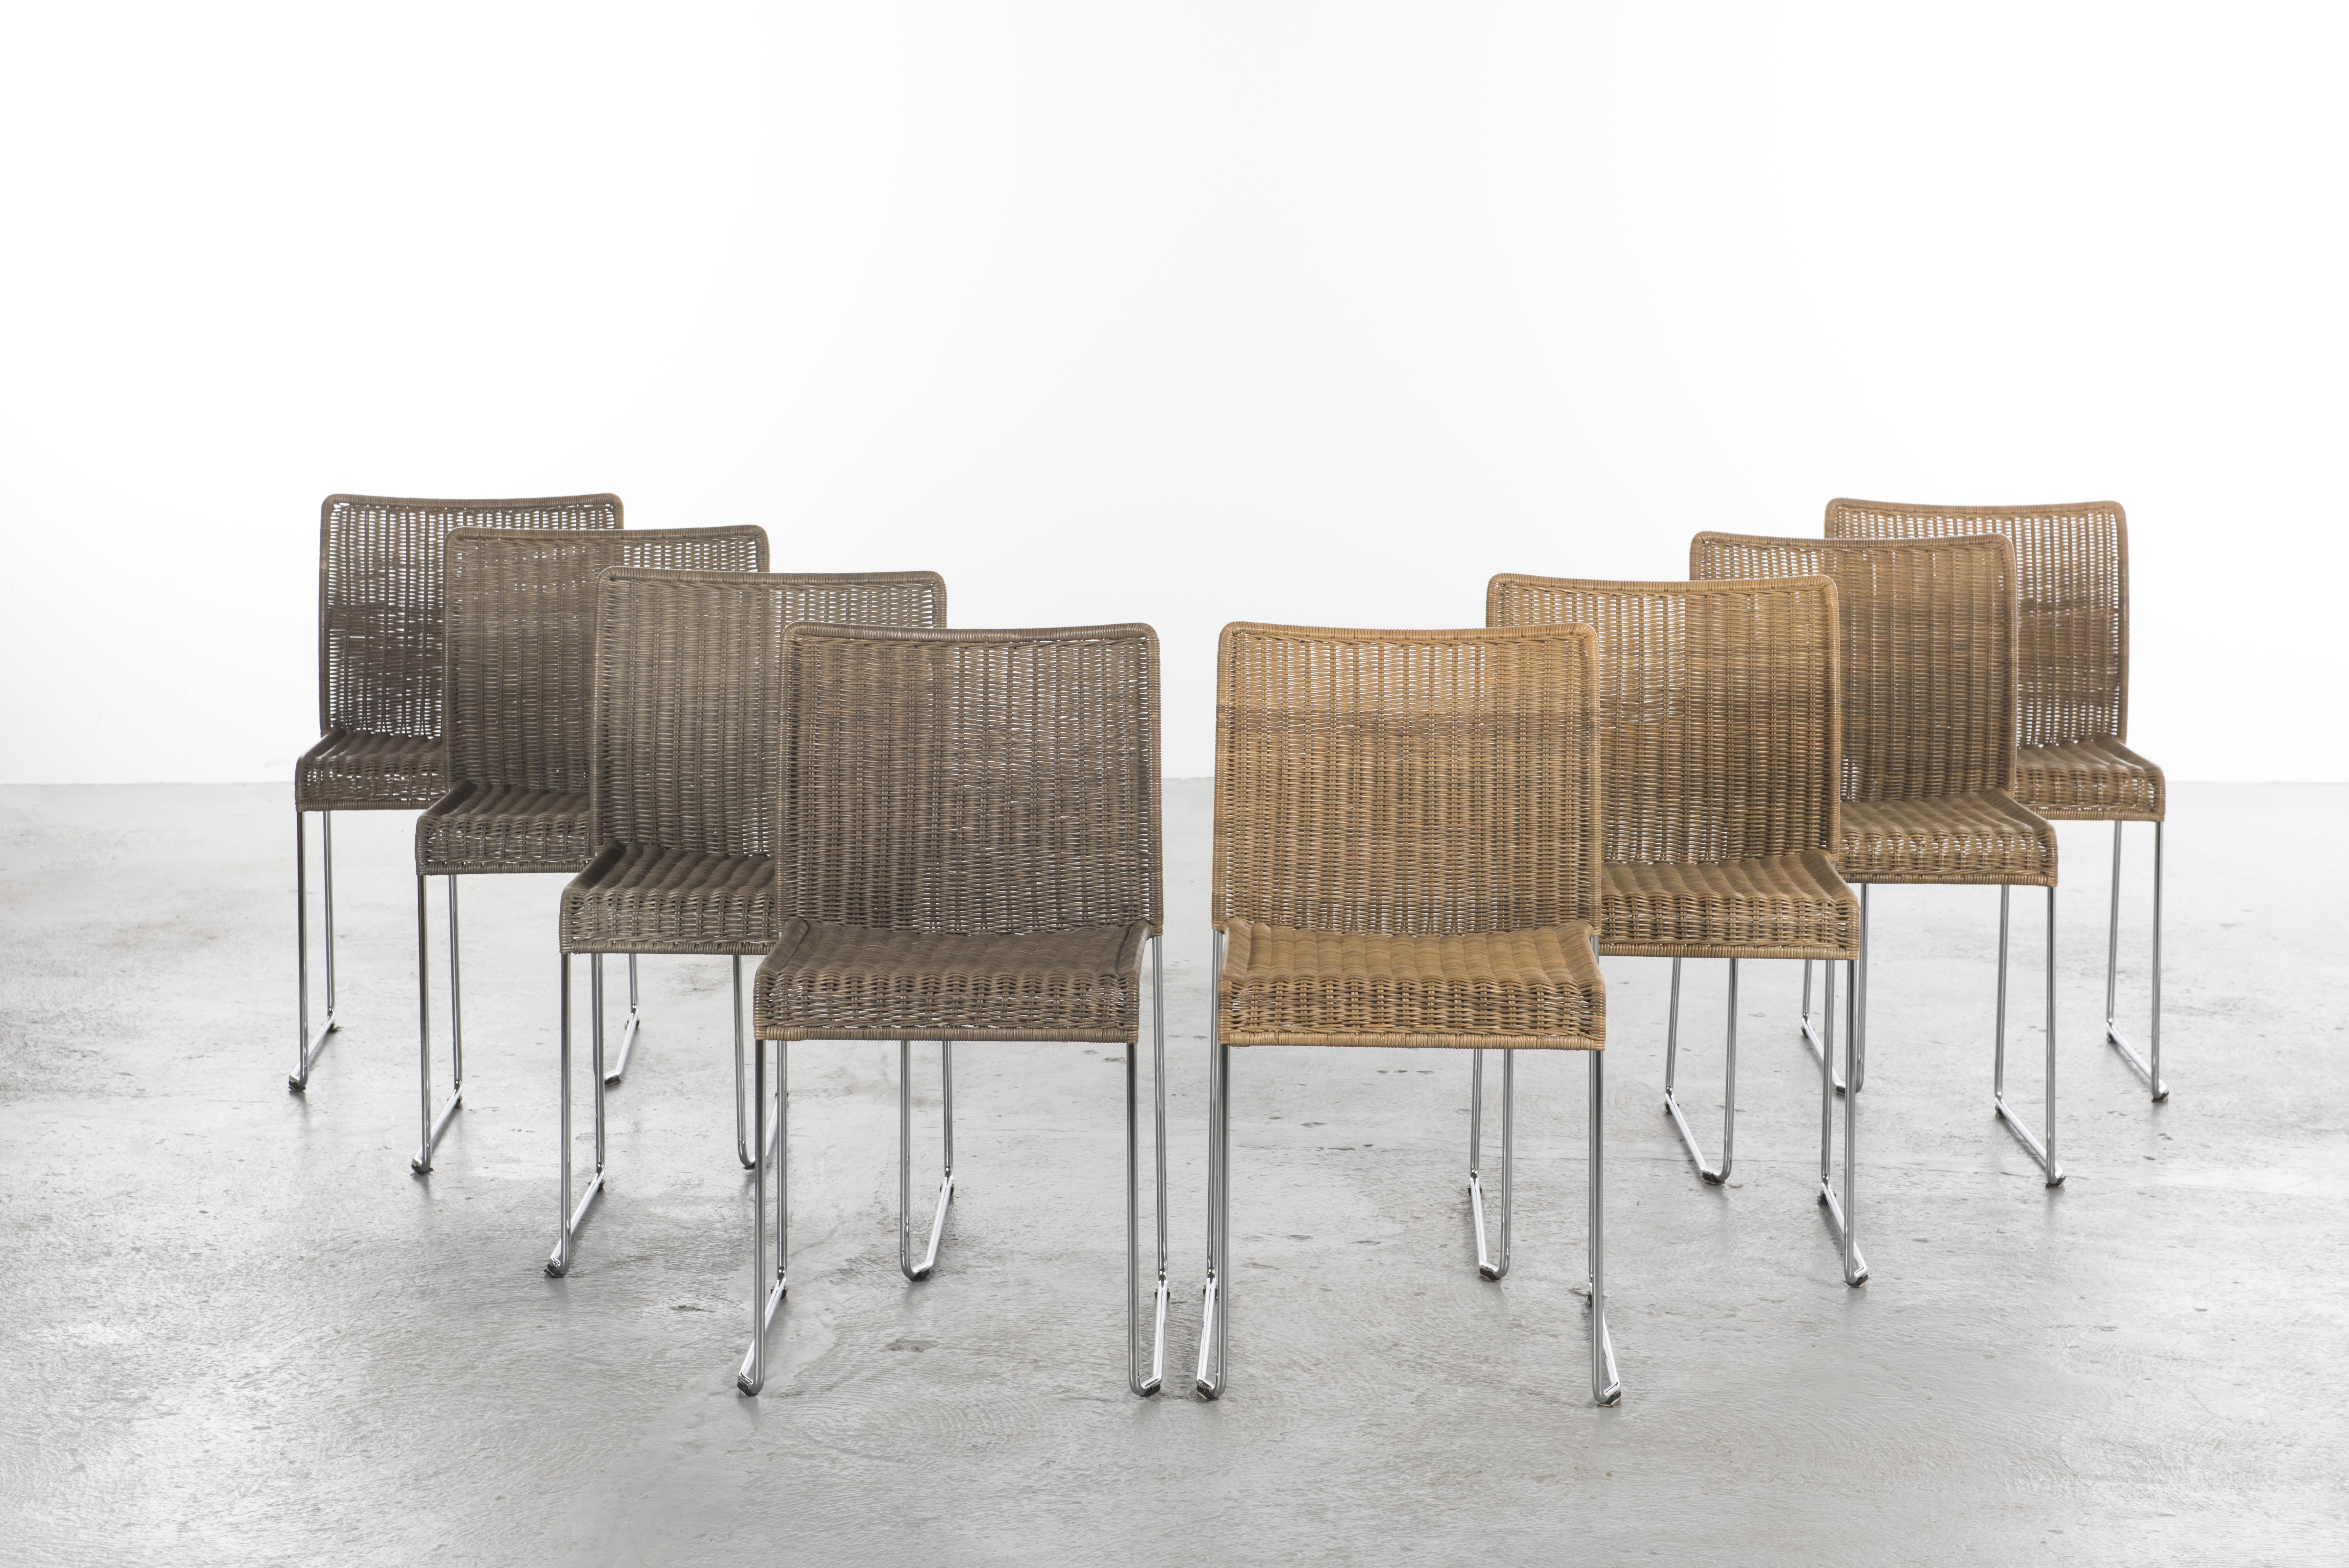 Set of eight dining rattan chairs model S 21 by Tito Agnoli for Pierantonio Bonacina.
Very comfortable continuous seat and back in natural rattan, colored for 4 chairs and a frame in chromed stainless steel.
The chairs can be stacked.
 